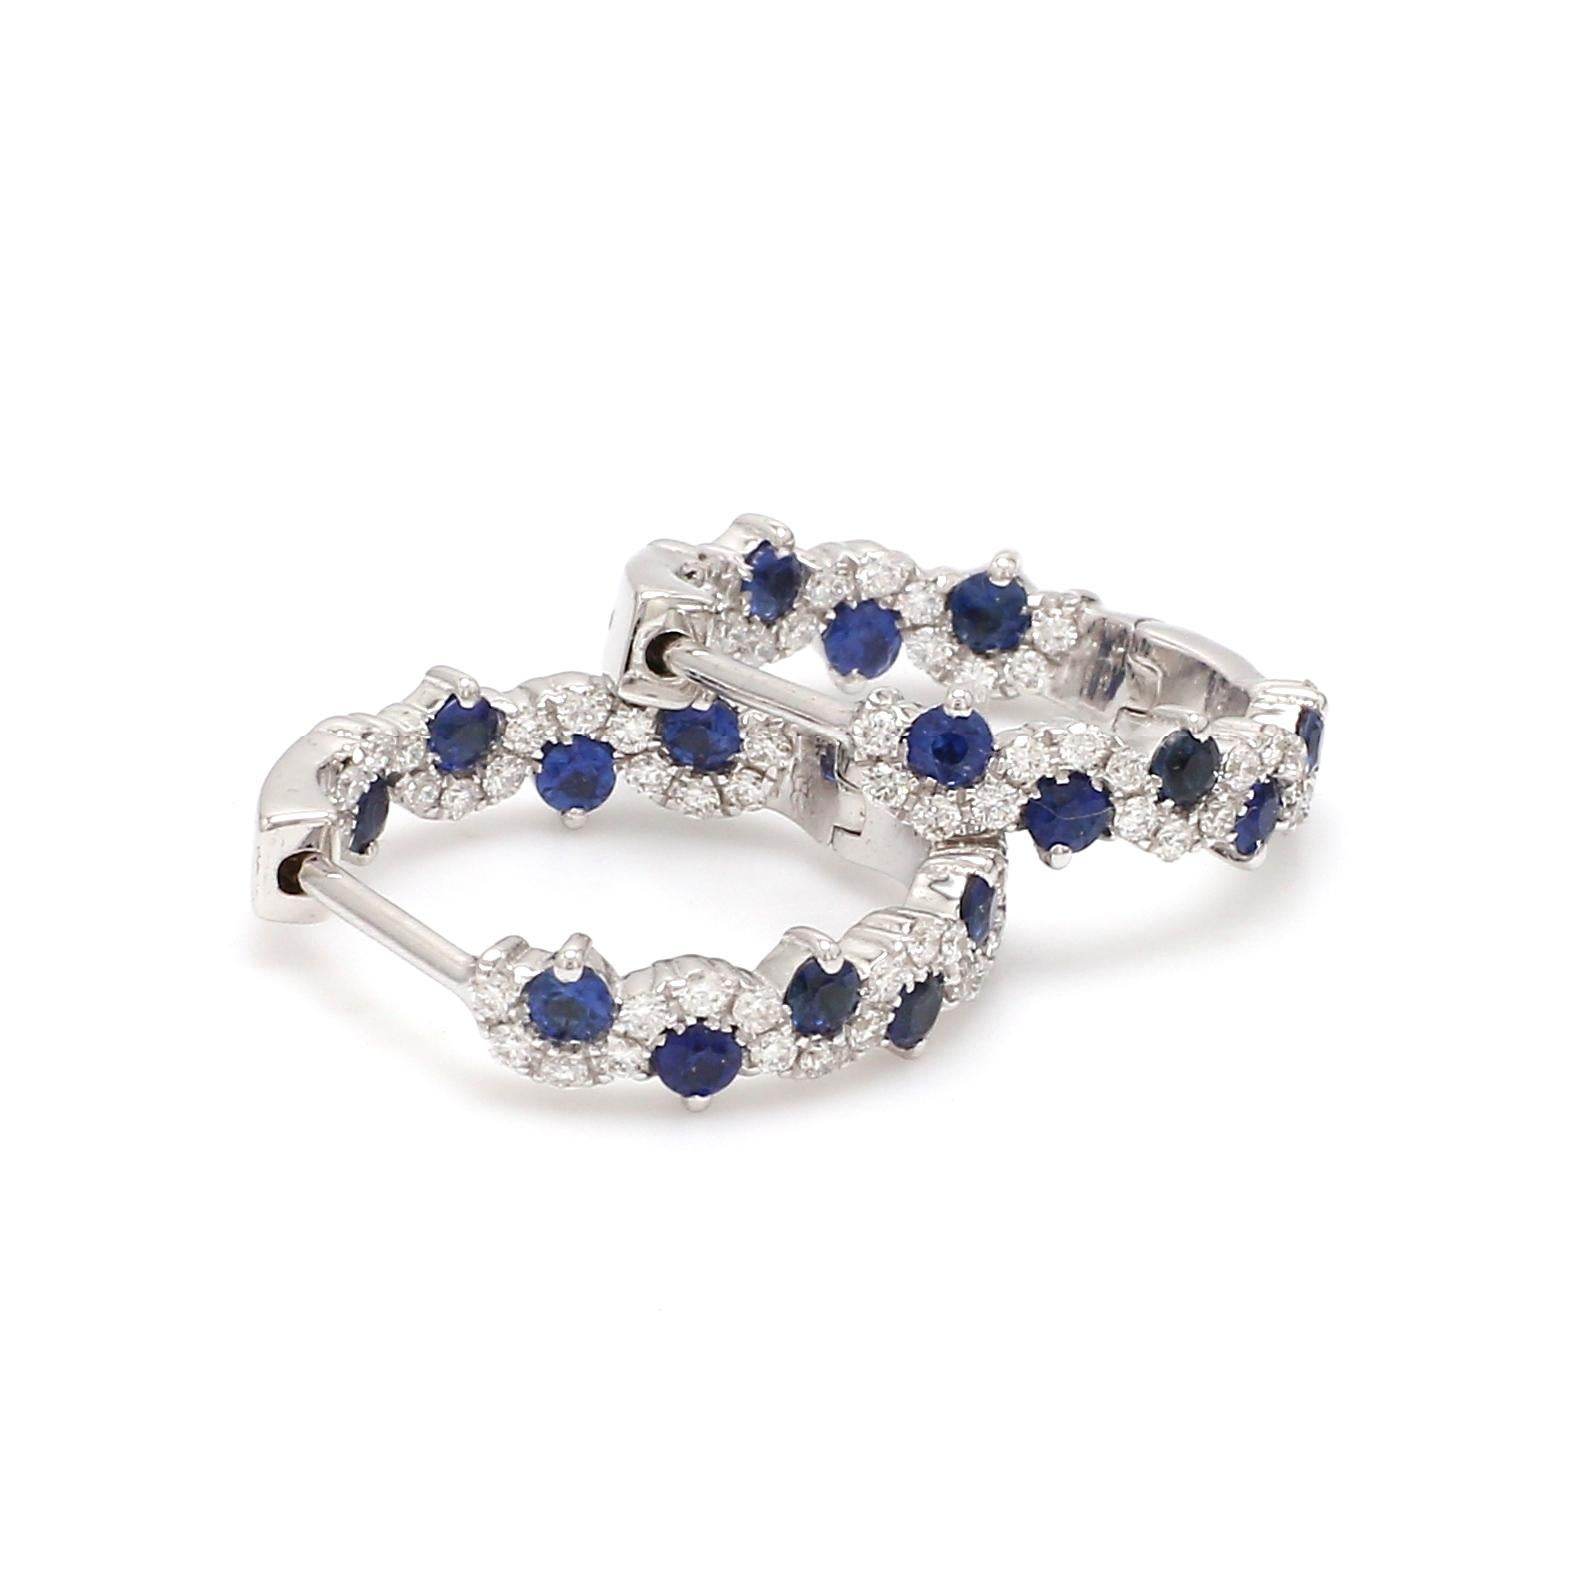 A Beautiful Handcrafted Hoop Earring in 18 karat White Gold with Natural Brilliant Cut Colorless Diamond And Natural Blue Sapphire. A Statement piece for Evening Wear

Natural Diamond Details
Pieces : 68 Pieces
Weight : 0.47 Carat 
Clarity of